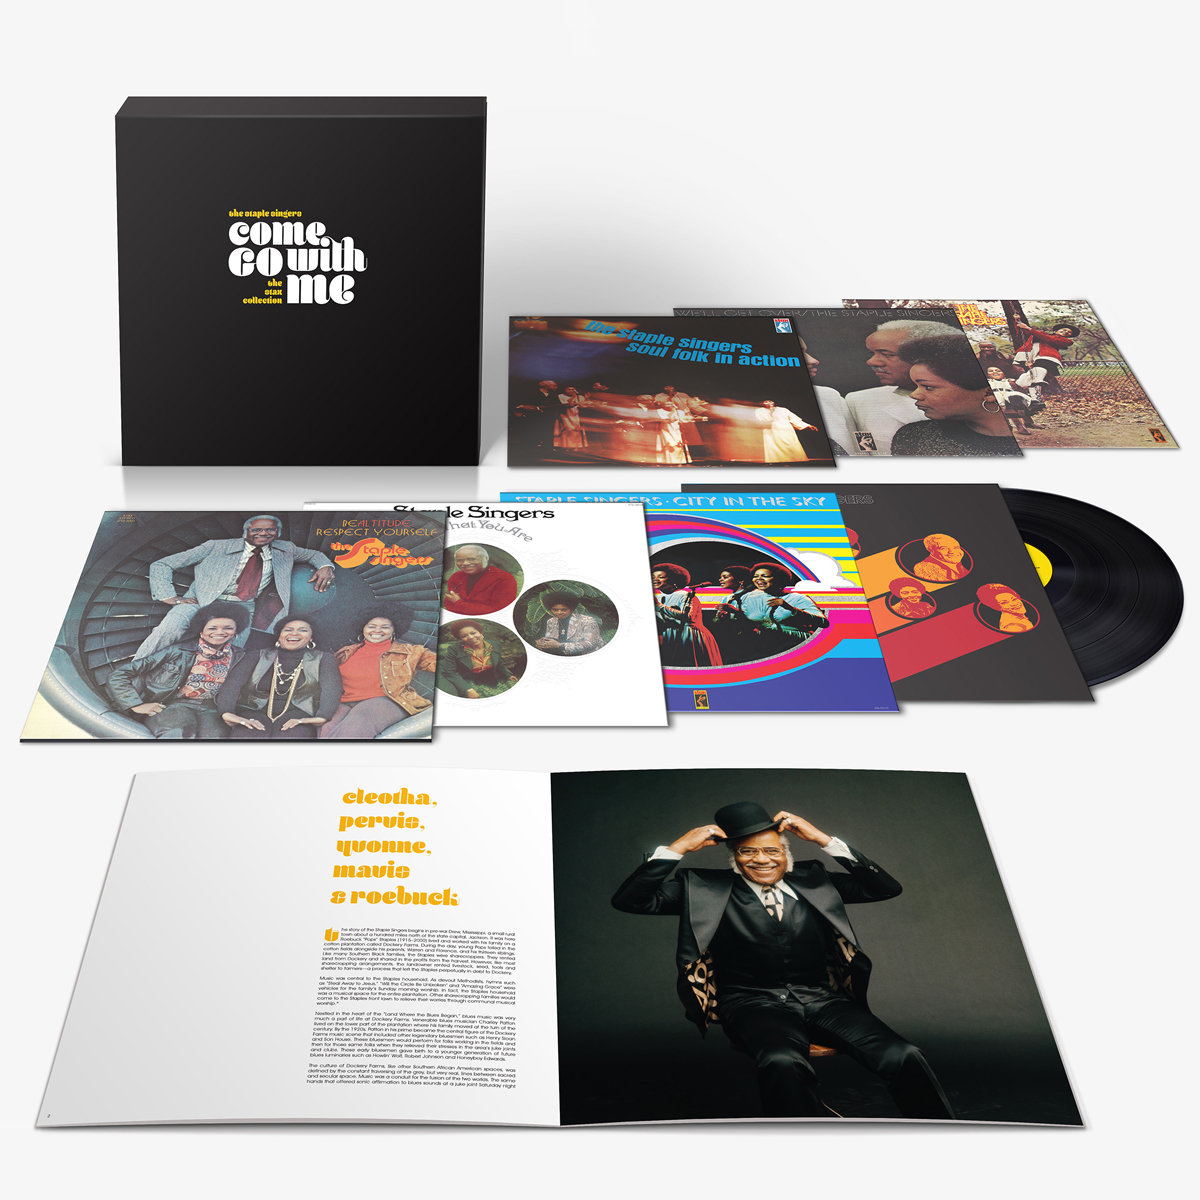 Featured image for “COME GO WITH ME: THE STAX COLLECTION DELUXE 7-LP BOX SET CELEBRATES THE STAPLE SINGERS’ STAX YEARS”